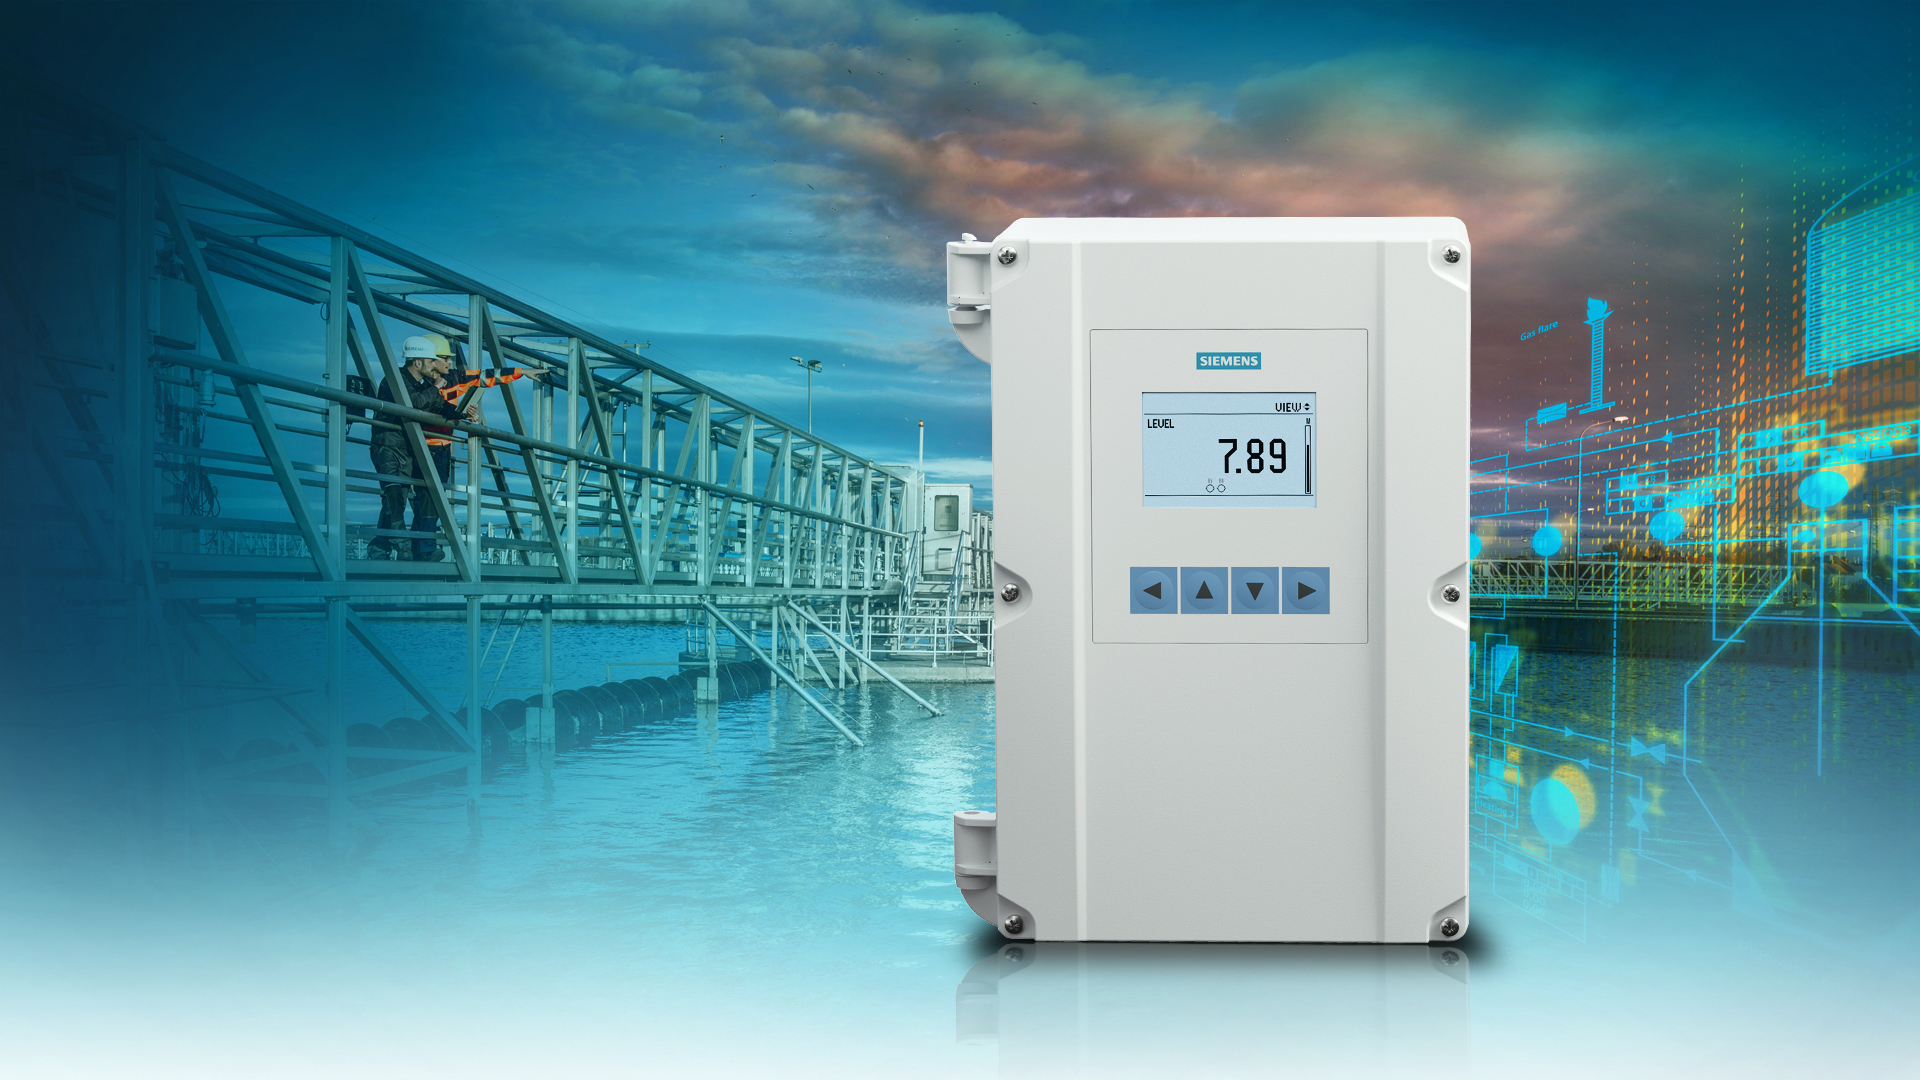 The new Sitrans LT500 is a level, flow, and pump controller for radar and ultrasonic transmitters or any other two-wire 4-20 mA devices.